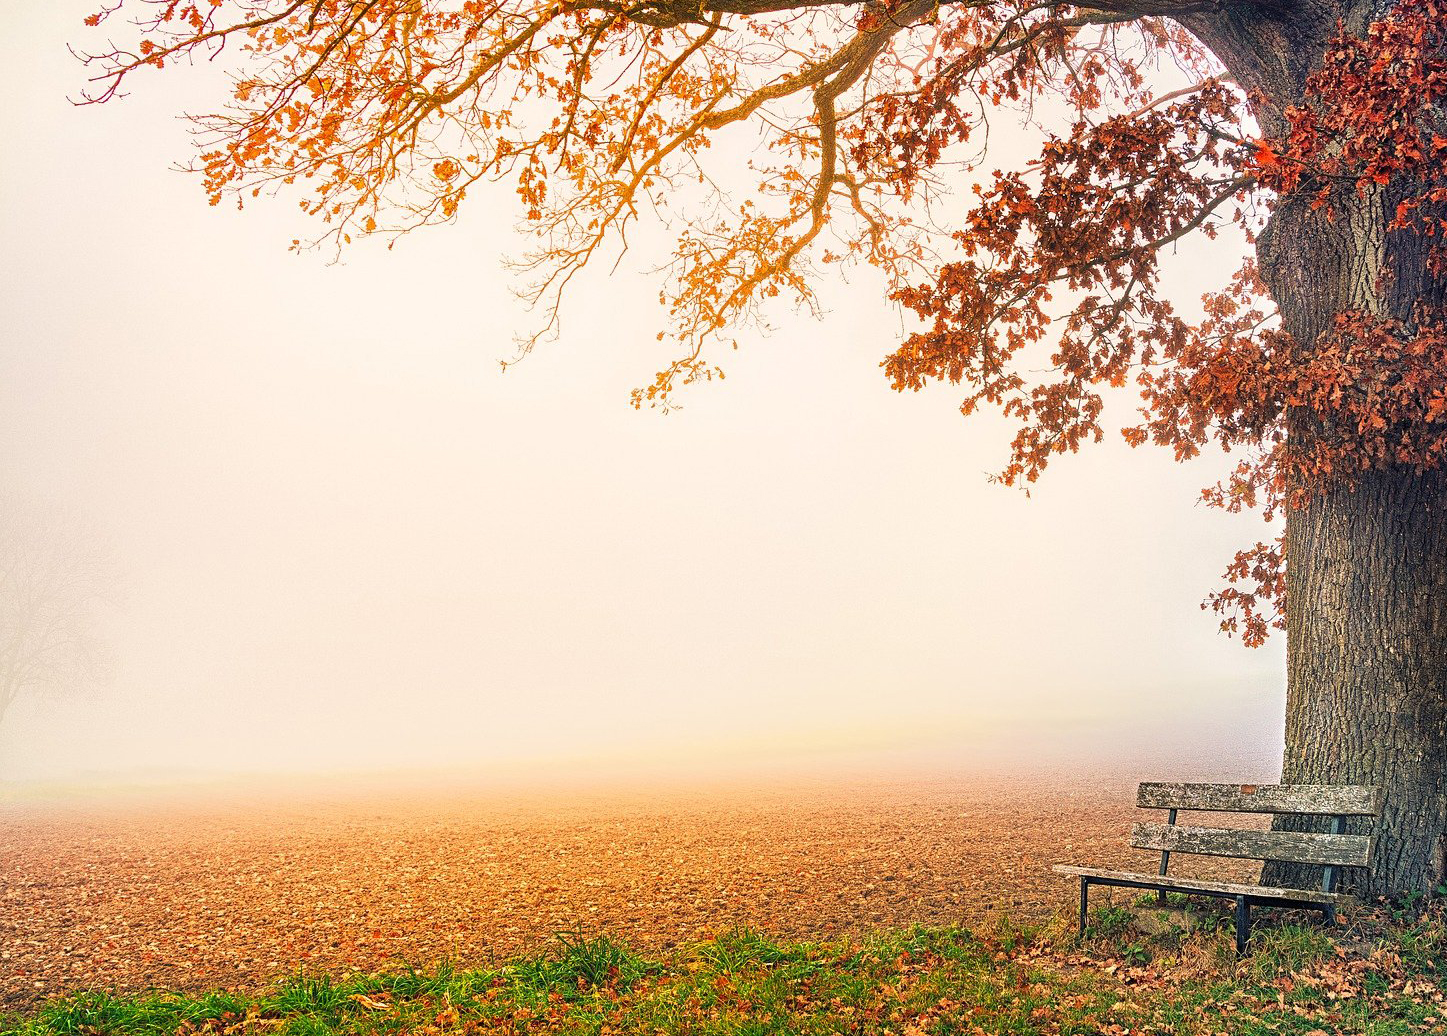 Wooden seat under a tall oak tree in autumn on a misty morning